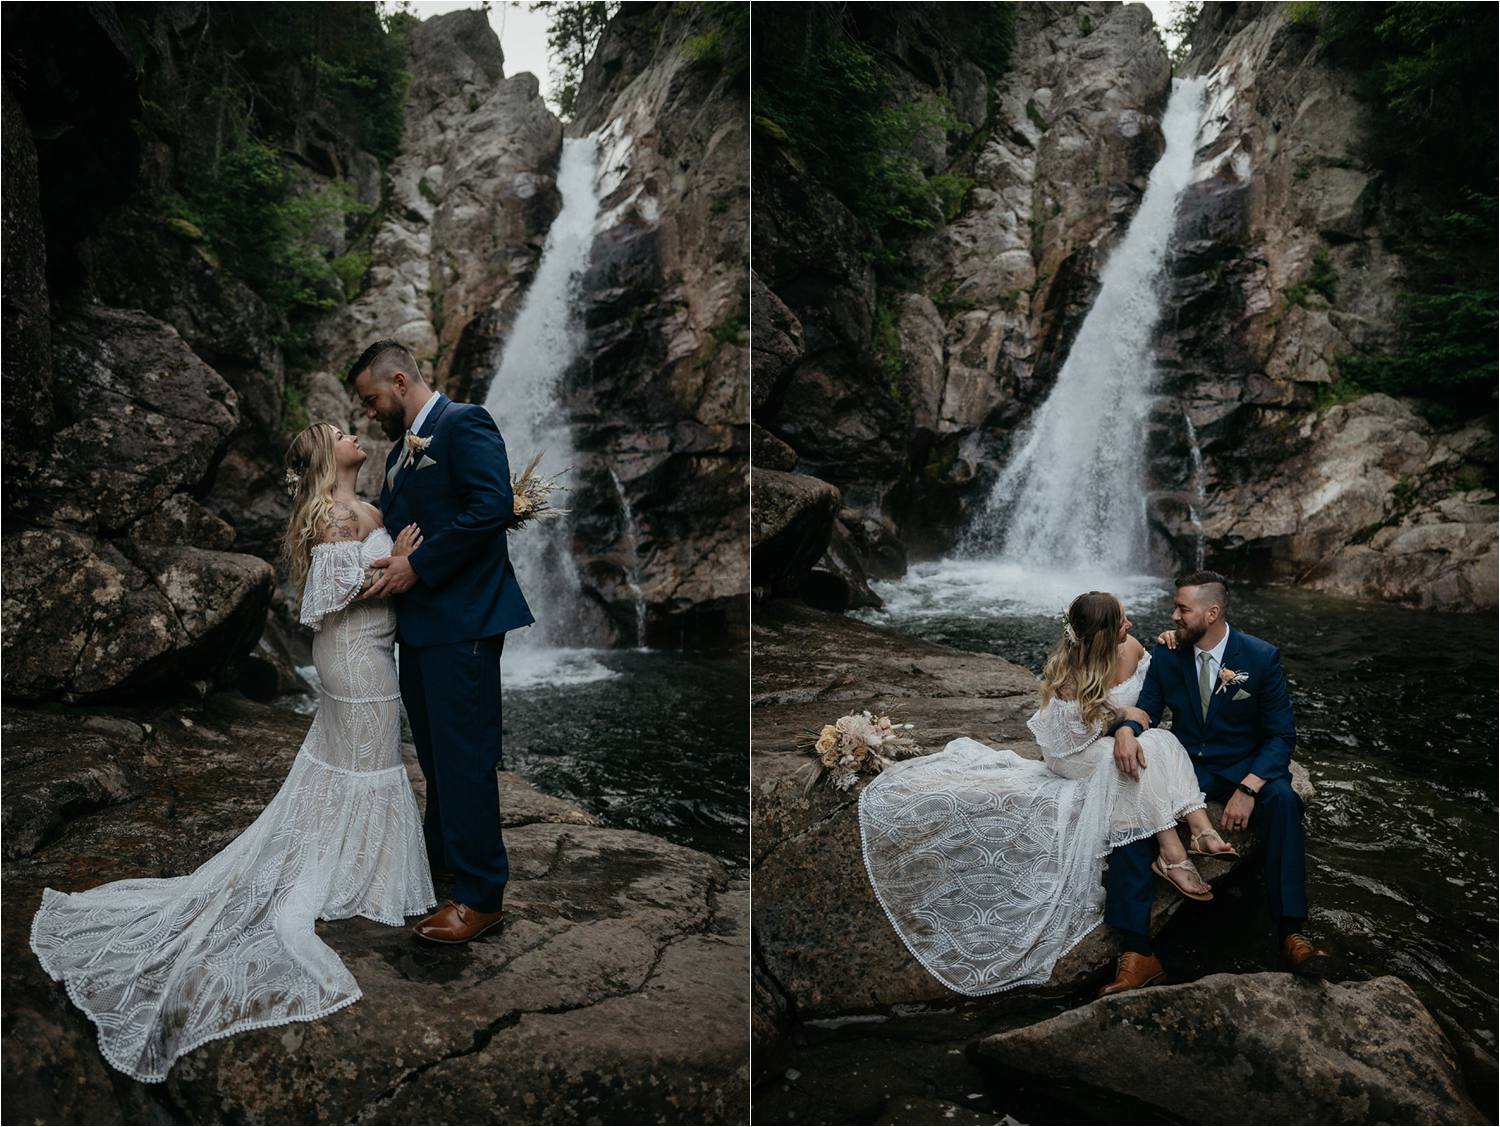 Boho bride and her groom pose in front of Glen Ellis Falls during their White Mountains Elopement